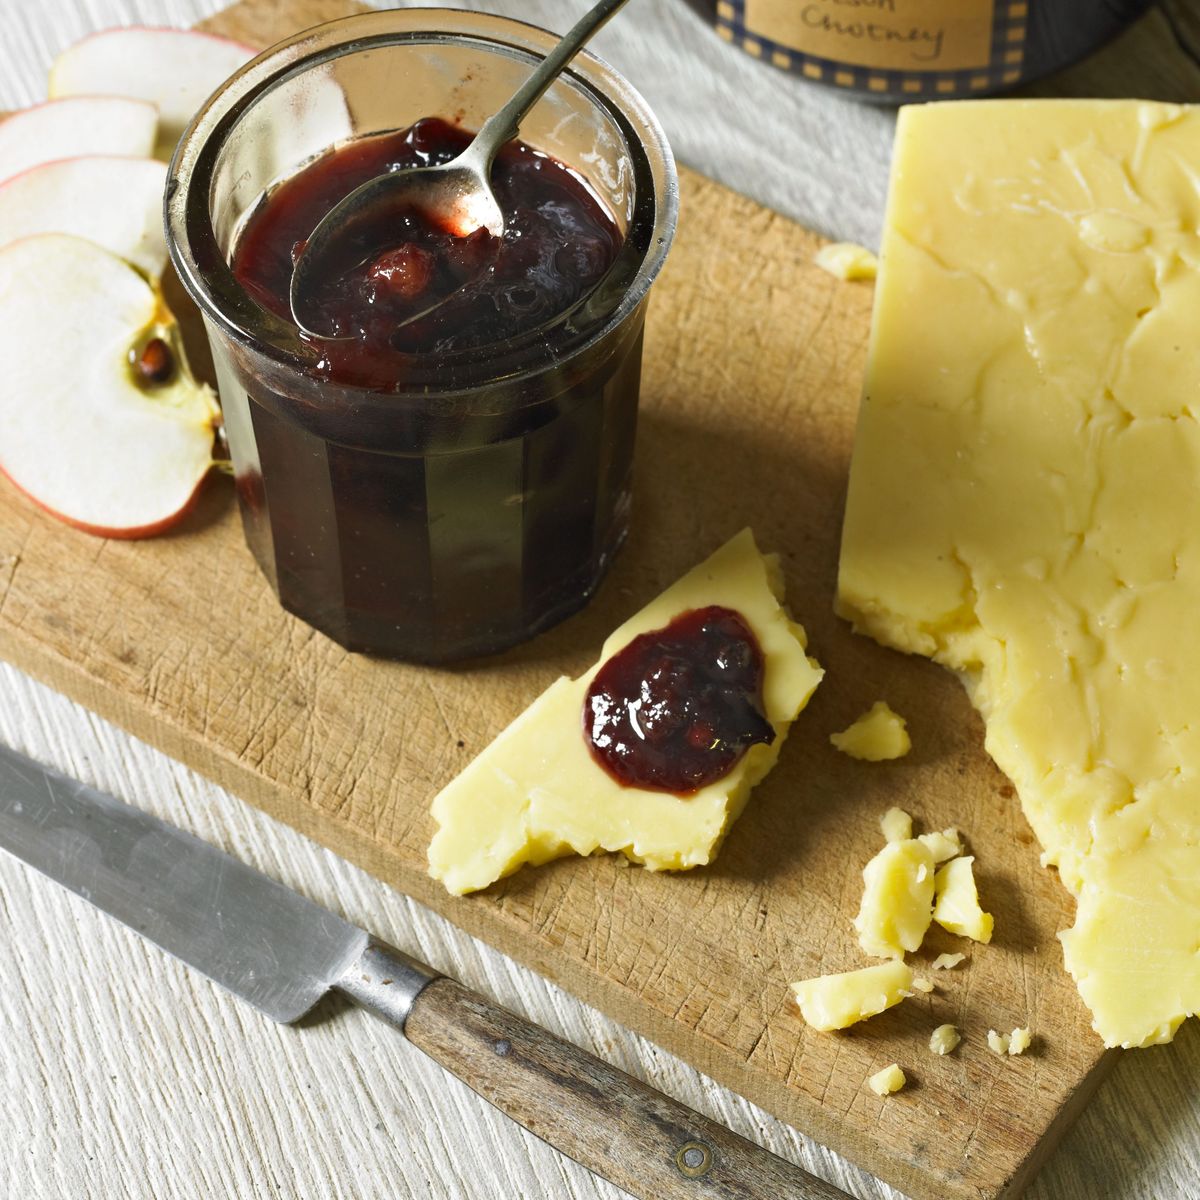 This spiced cranberry and fig chutney will make a perfect edible Christmas gift